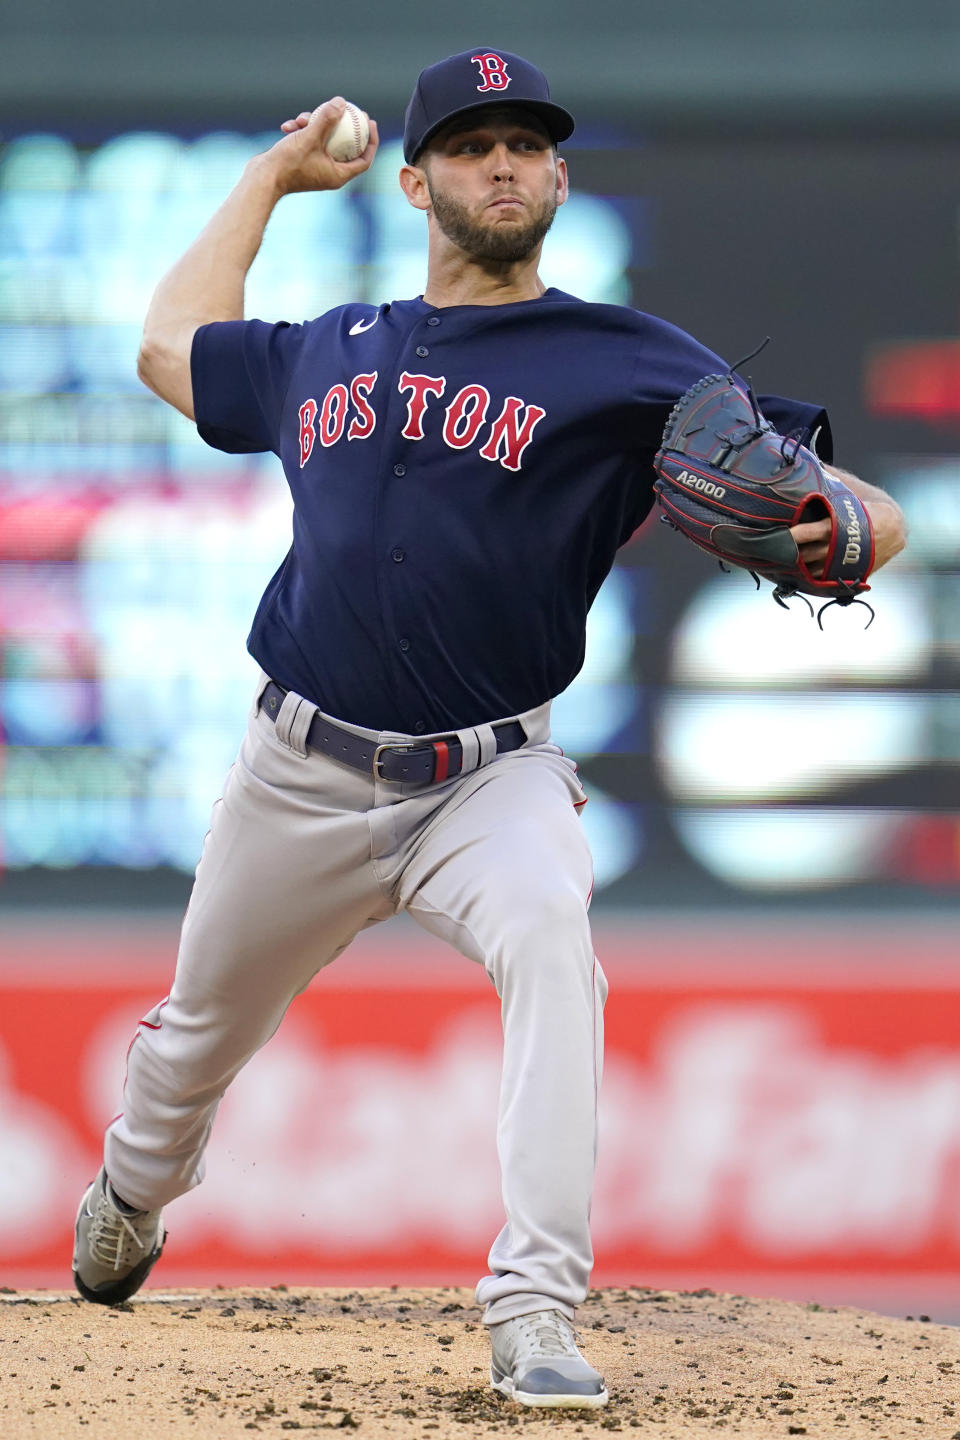 Boston Red Sox starting pitcher Kutter Crawford delivers during the first inning of the team's baseball game against the Minnesota Twins, Tuesday, Aug. 30, 2022, in Minneapolis. (AP Photo/Abbie Parr)